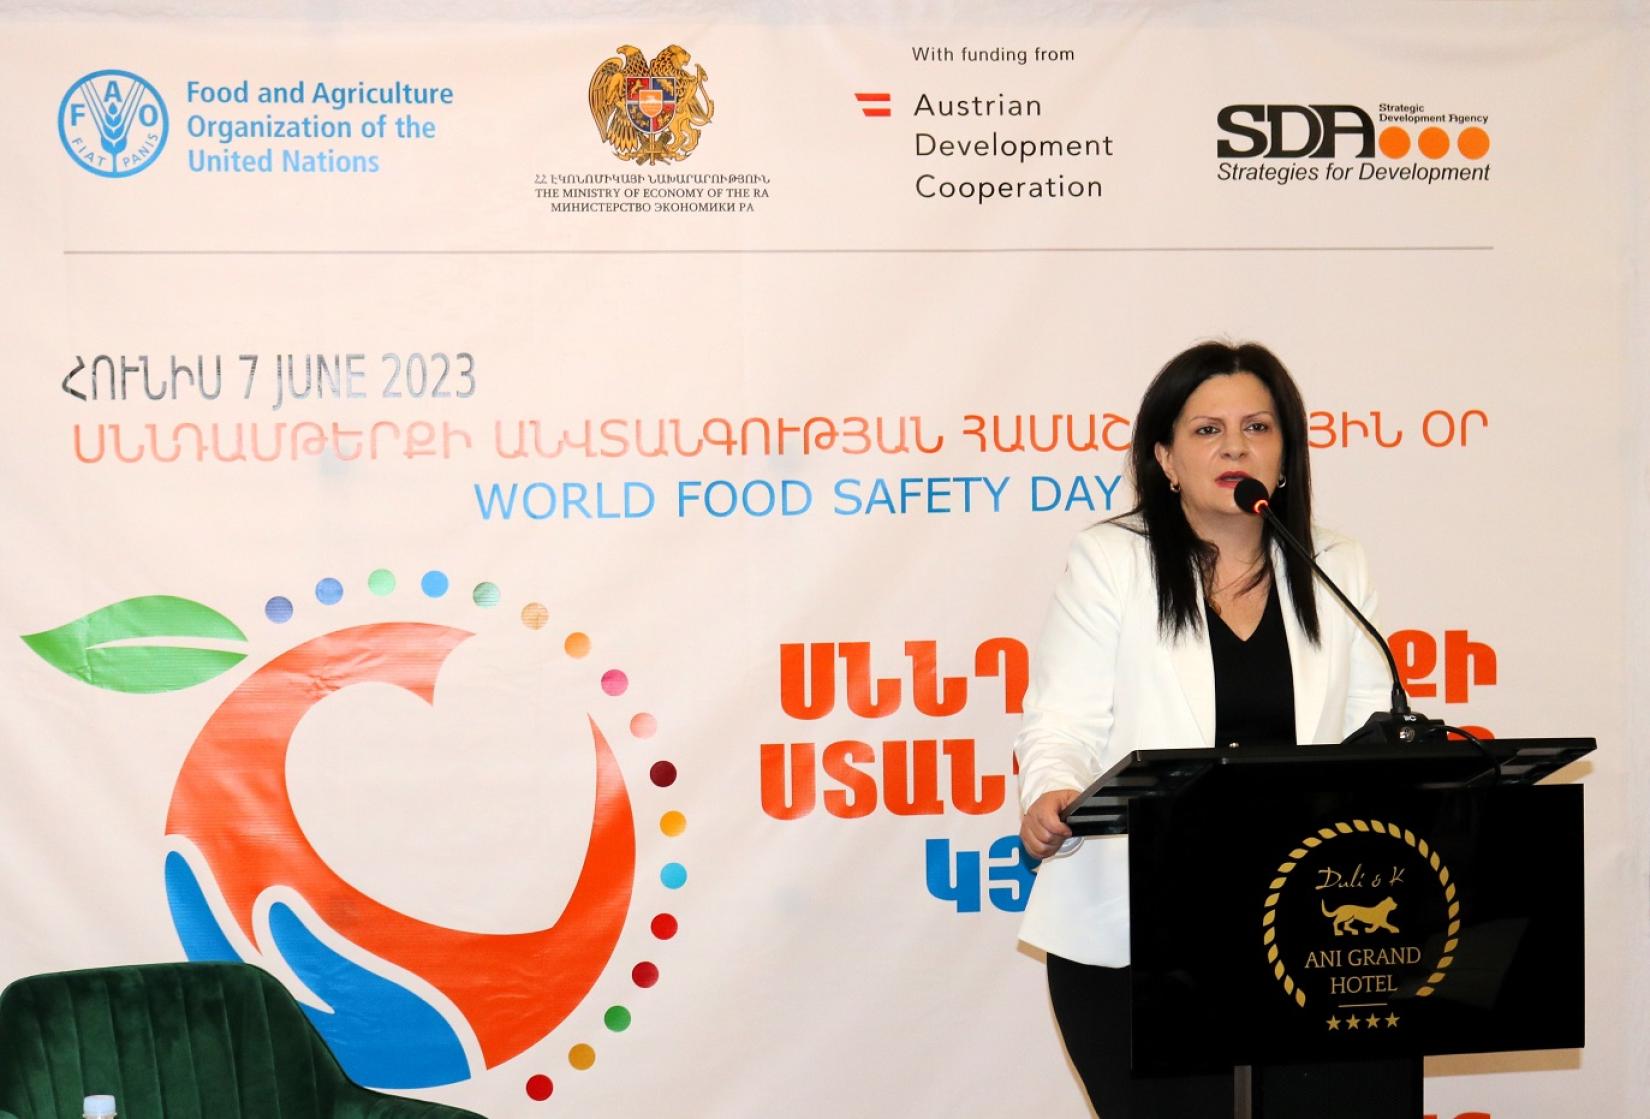 A woman delivers a speech on World Food Safety Day.